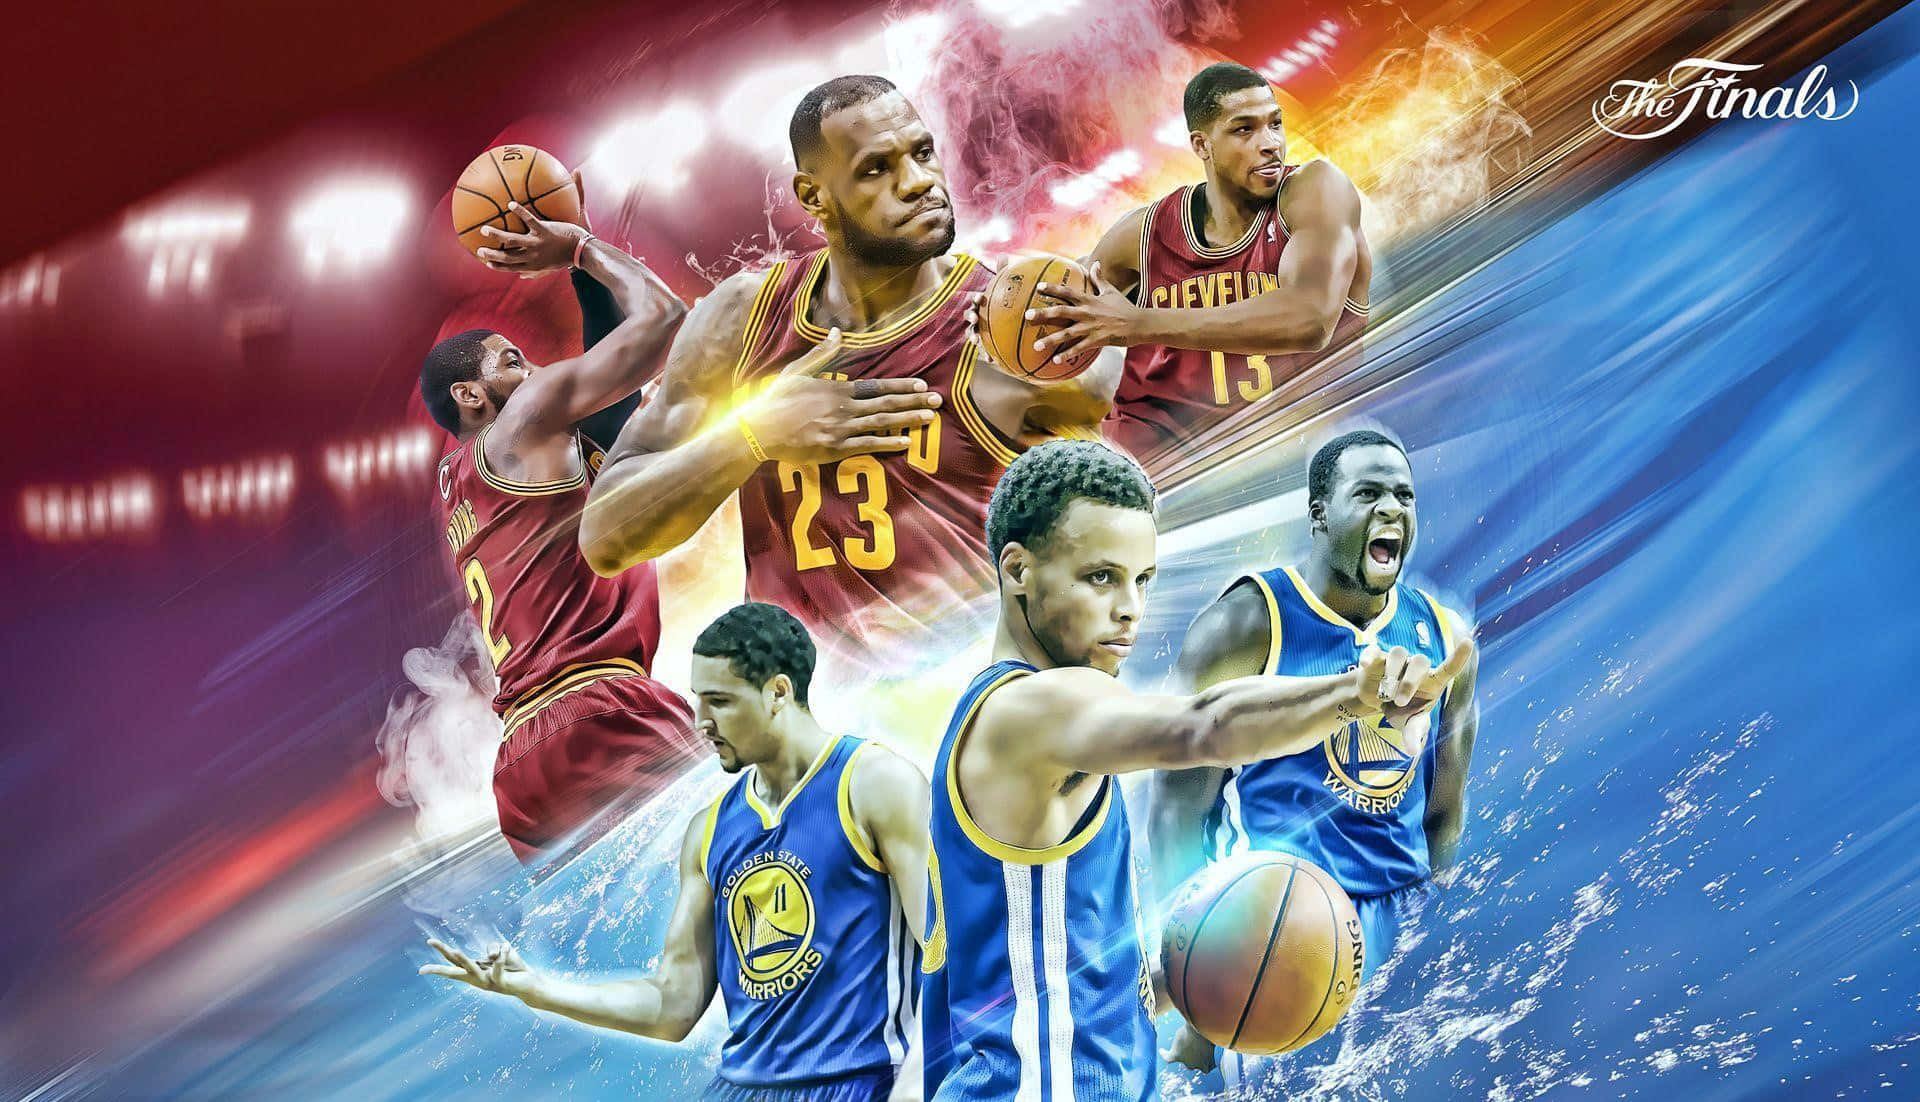 480 Best Cool basketball wallpapers ideas  basketball wallpaper cool  basketball wallpapers basketball players